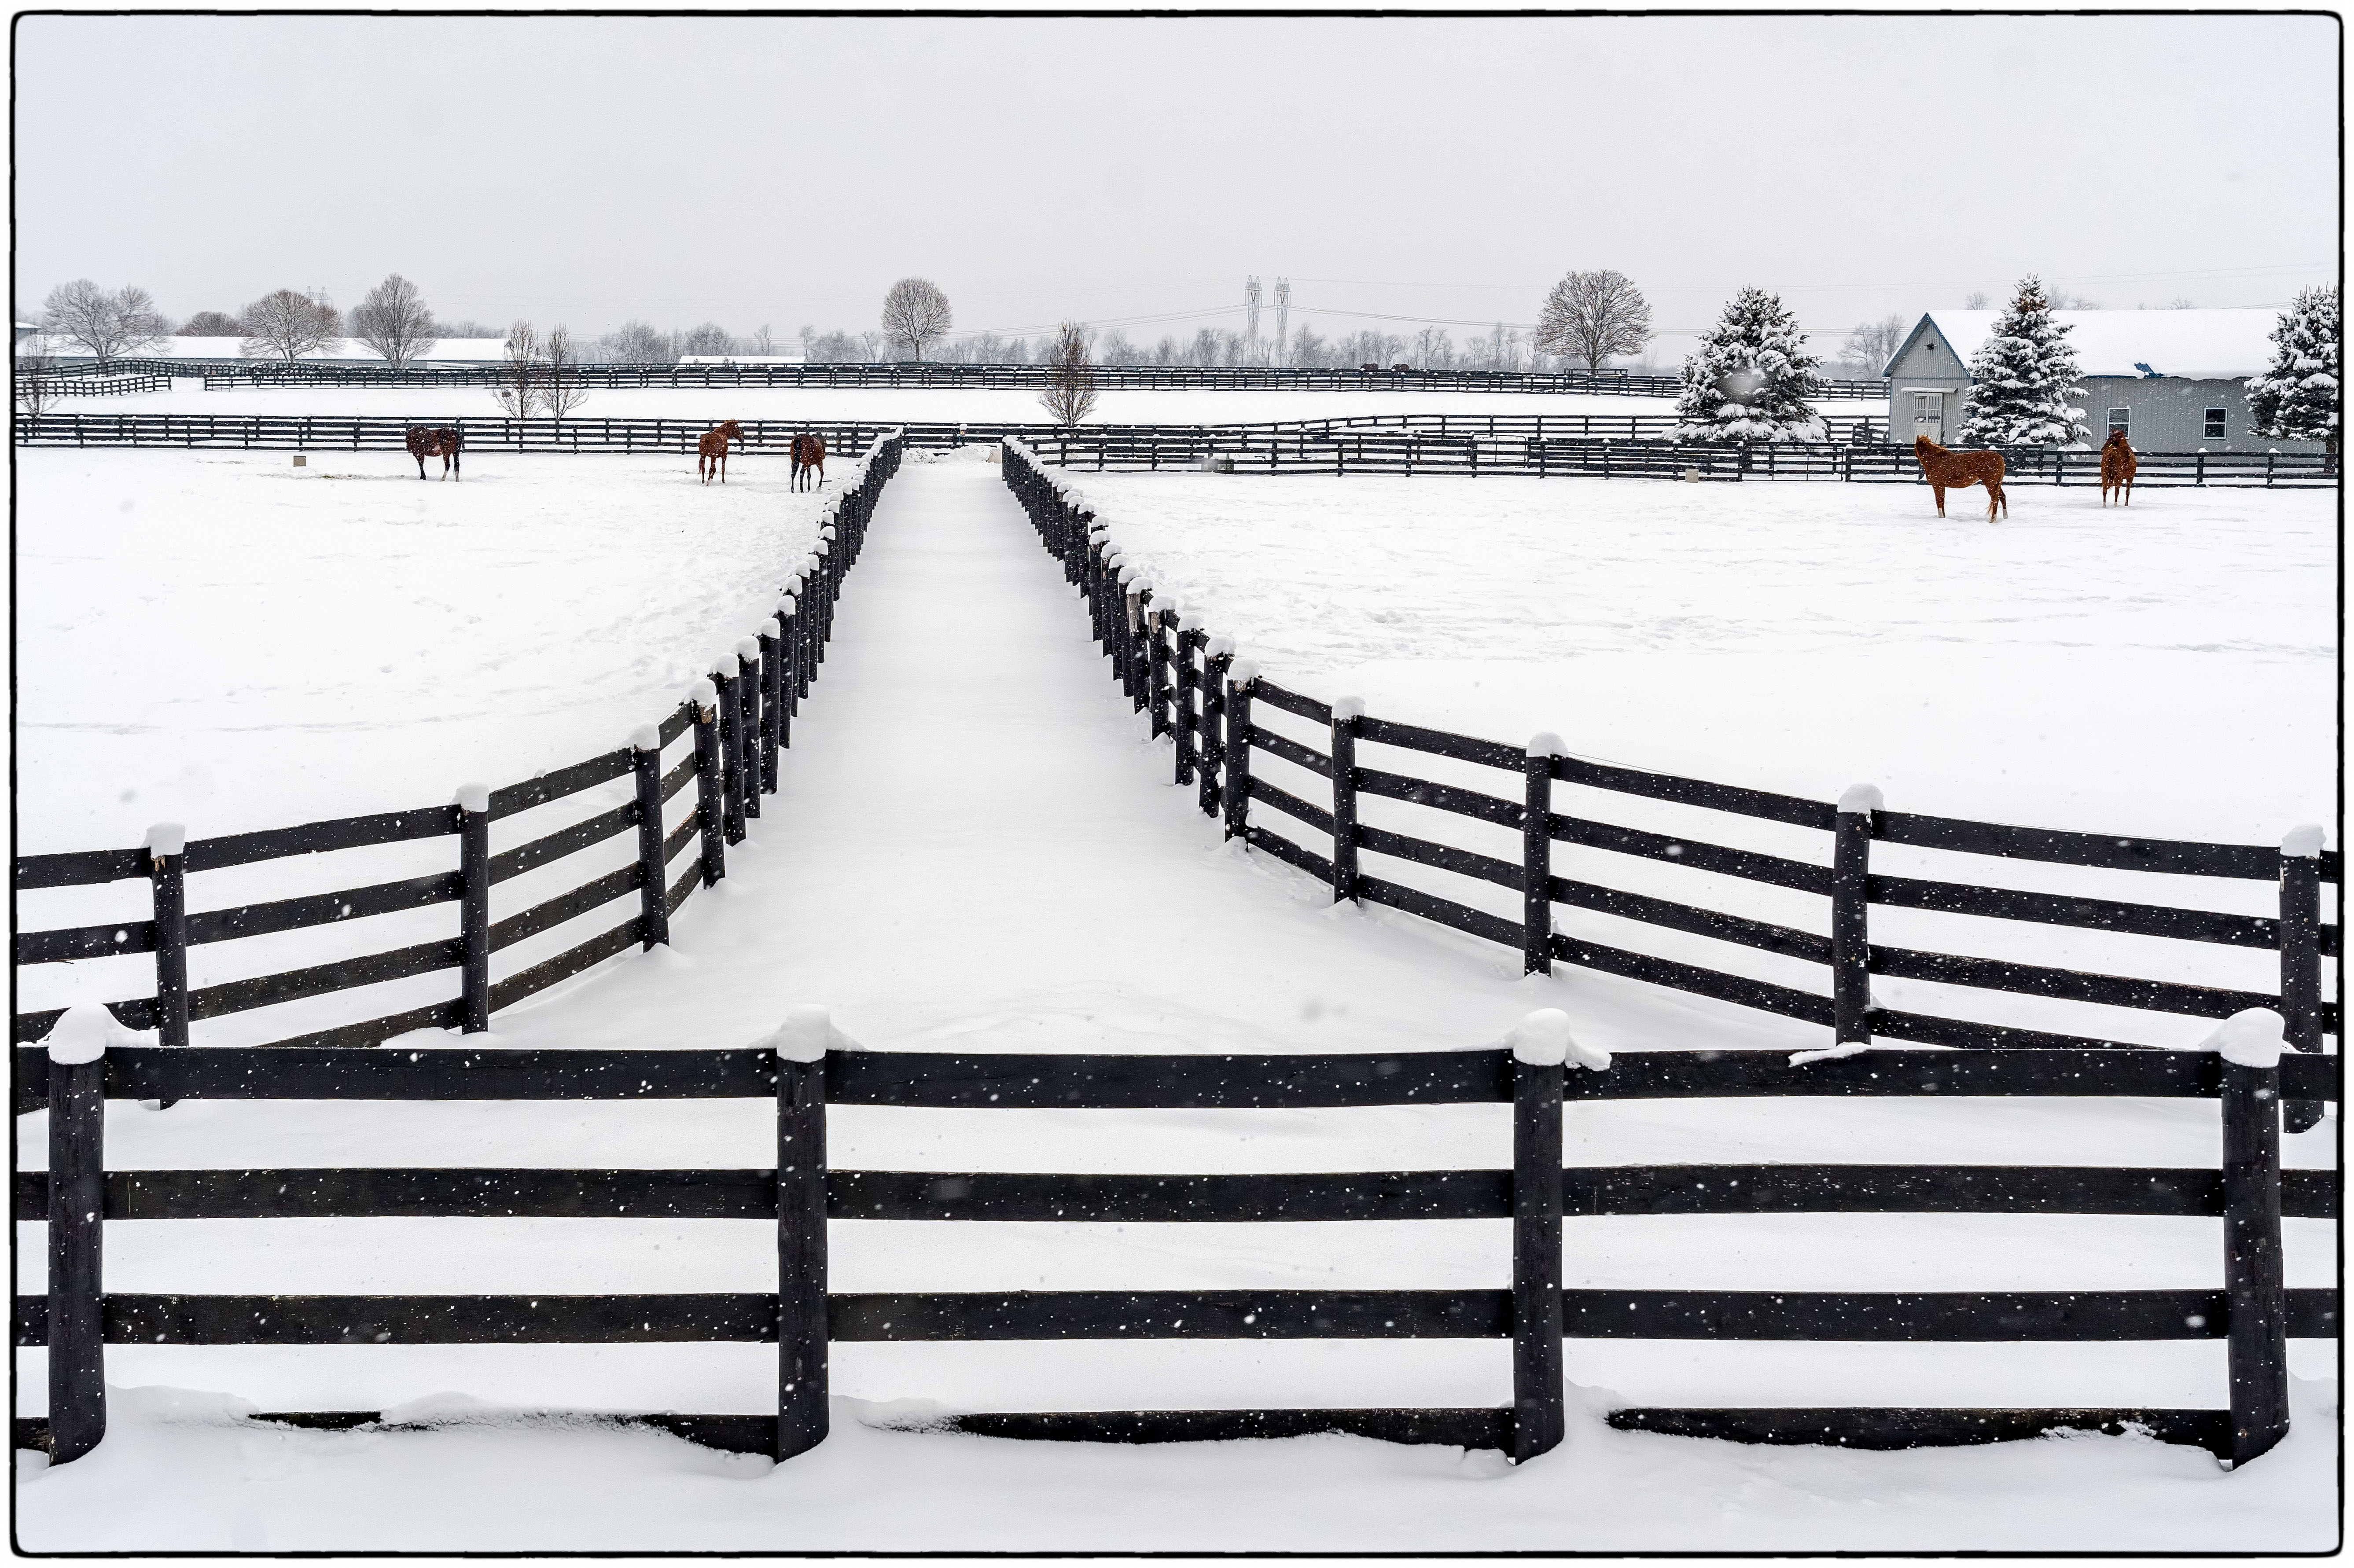 Fences by Mike Lynch